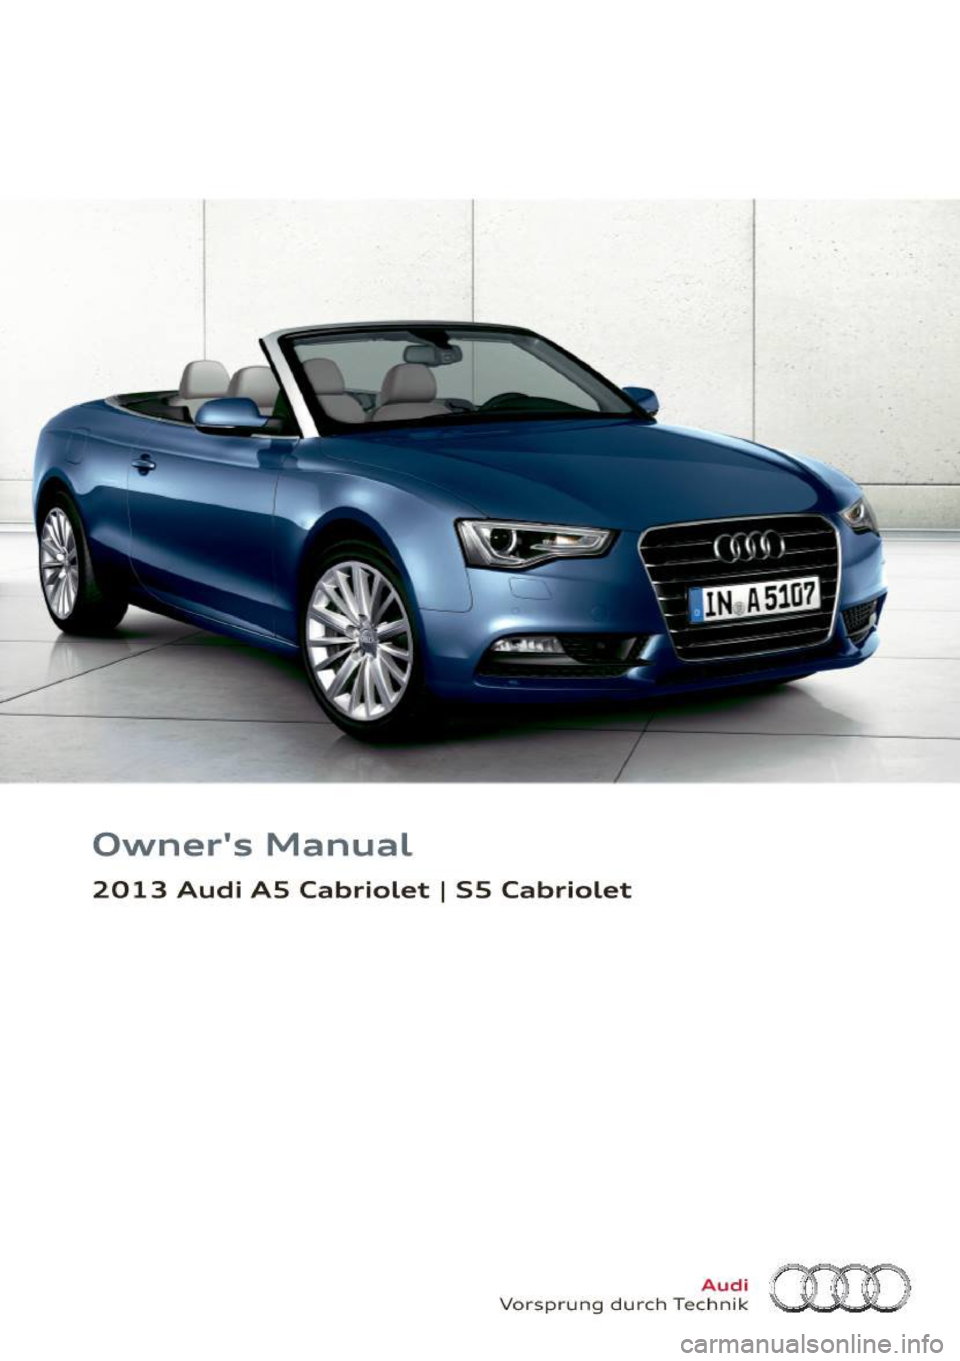 AUDI A5 CABRIOLET 2013  Owners Manual 